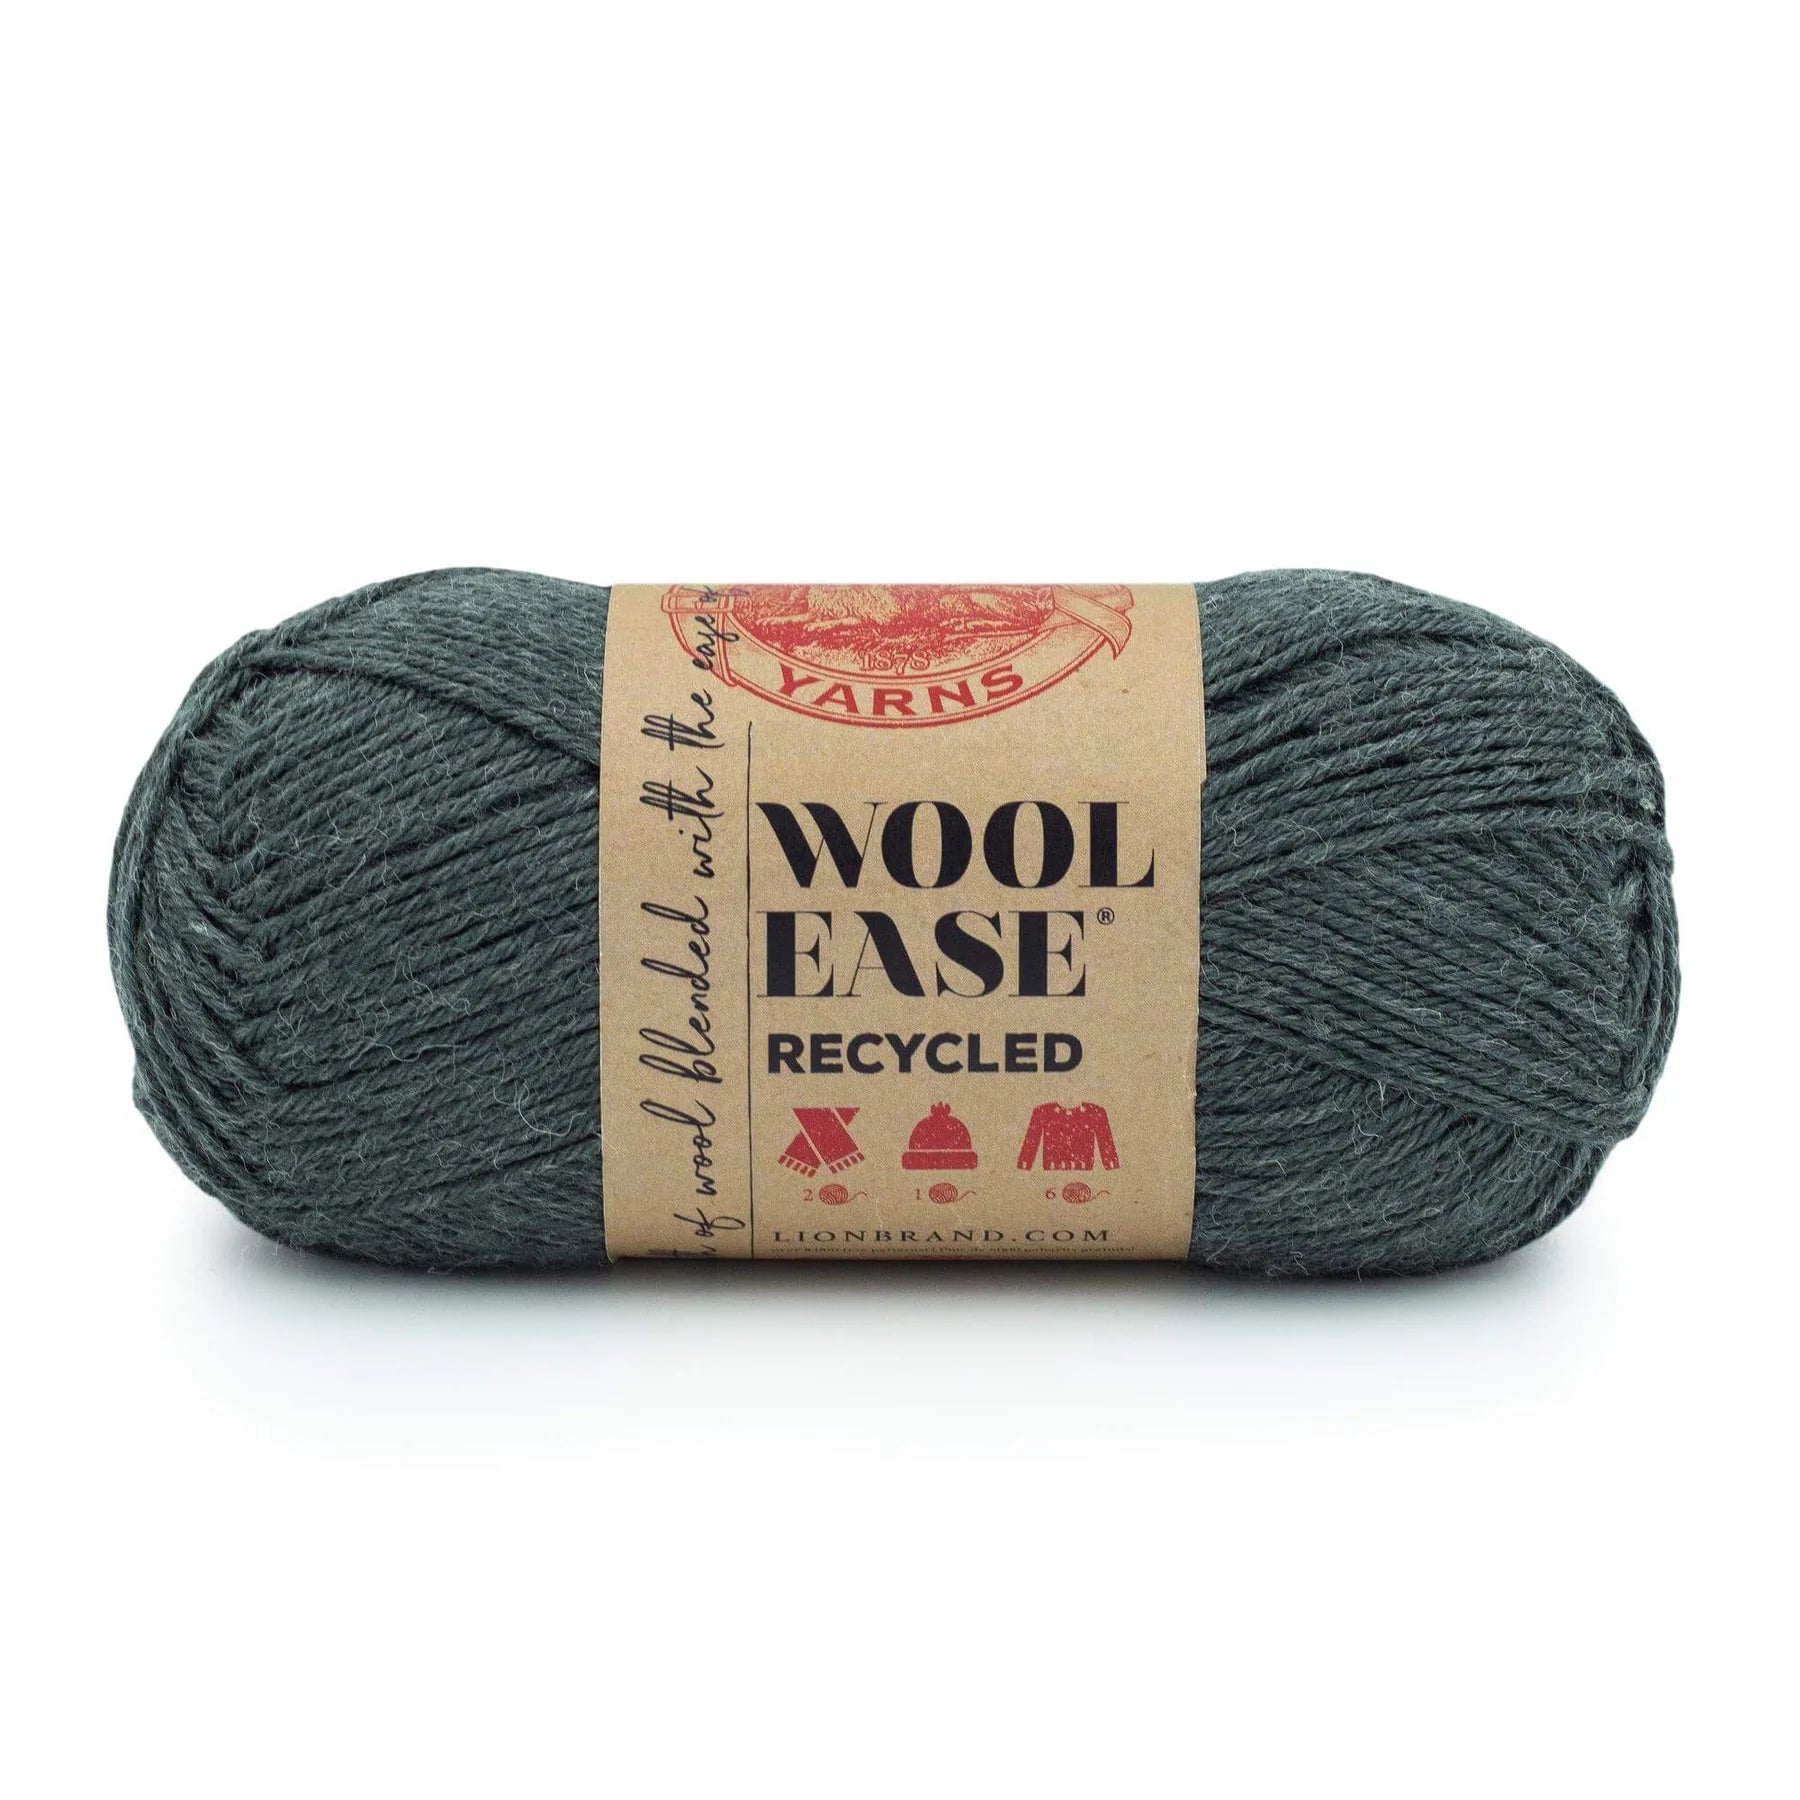 Lion Brand Yarns-Wool-Ease Recycled-yarn-Charcoal-gather here online